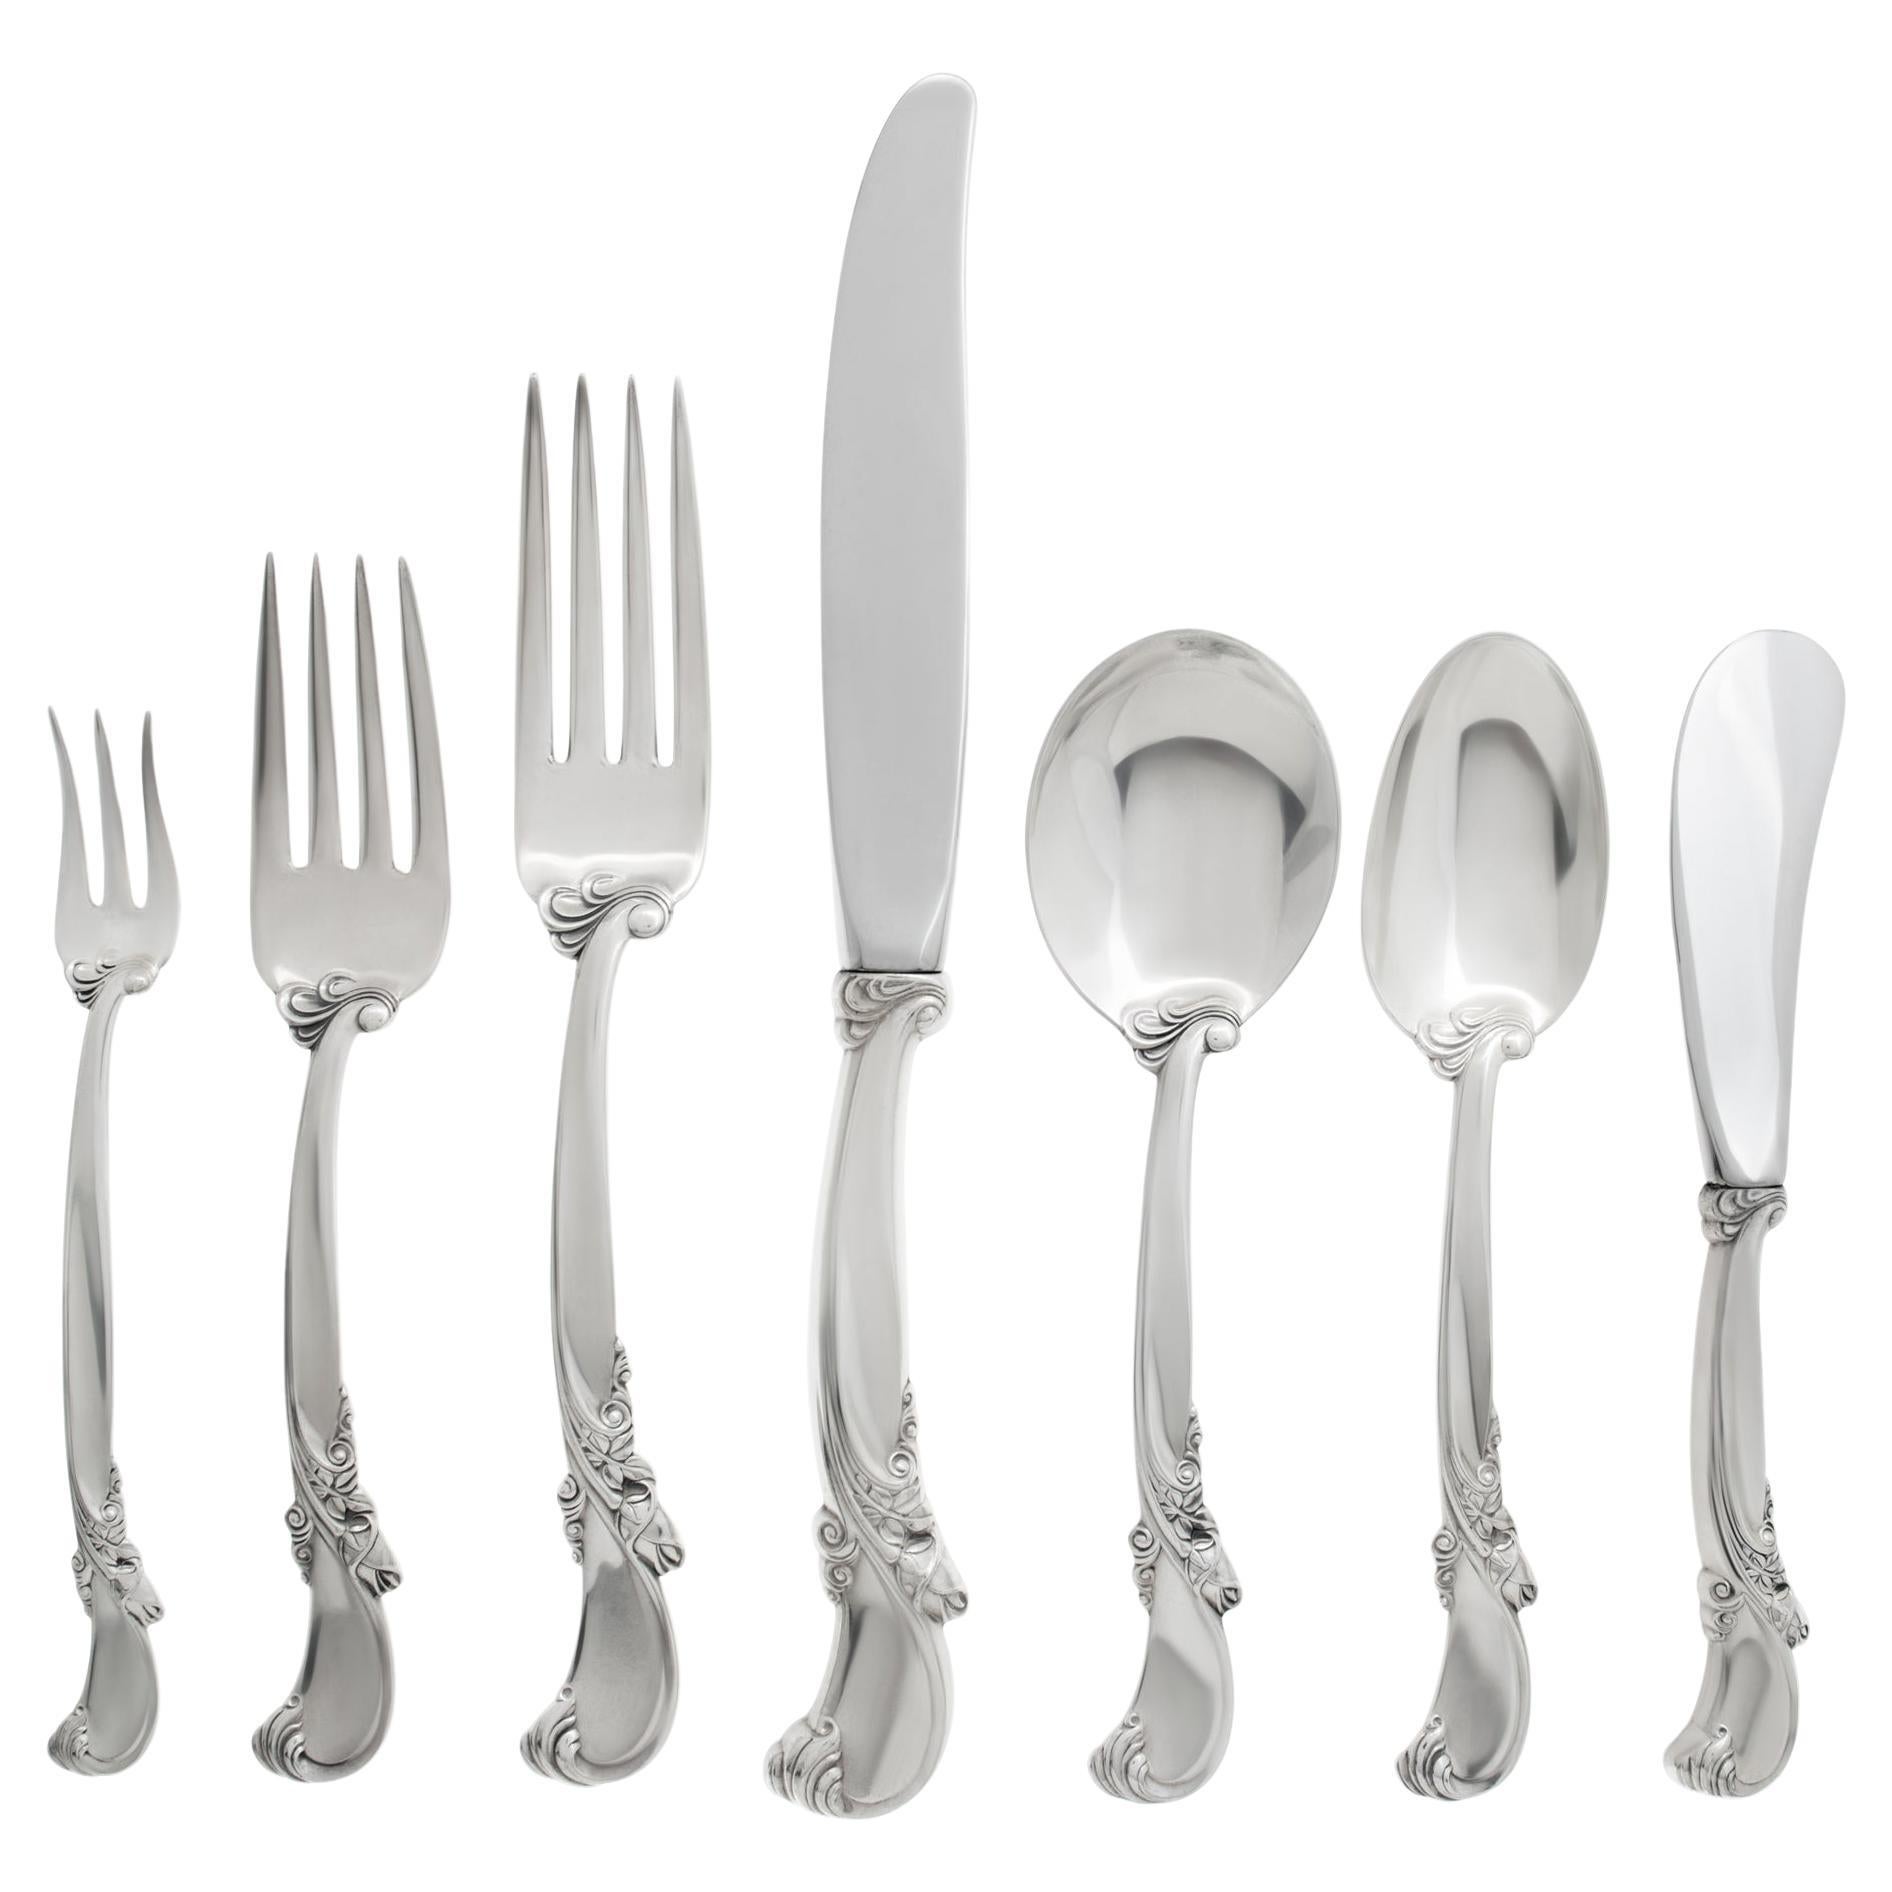 WALTZ OF SPRING, 74 pieces, sterling silver flatware set, patented by Wallace For Sale